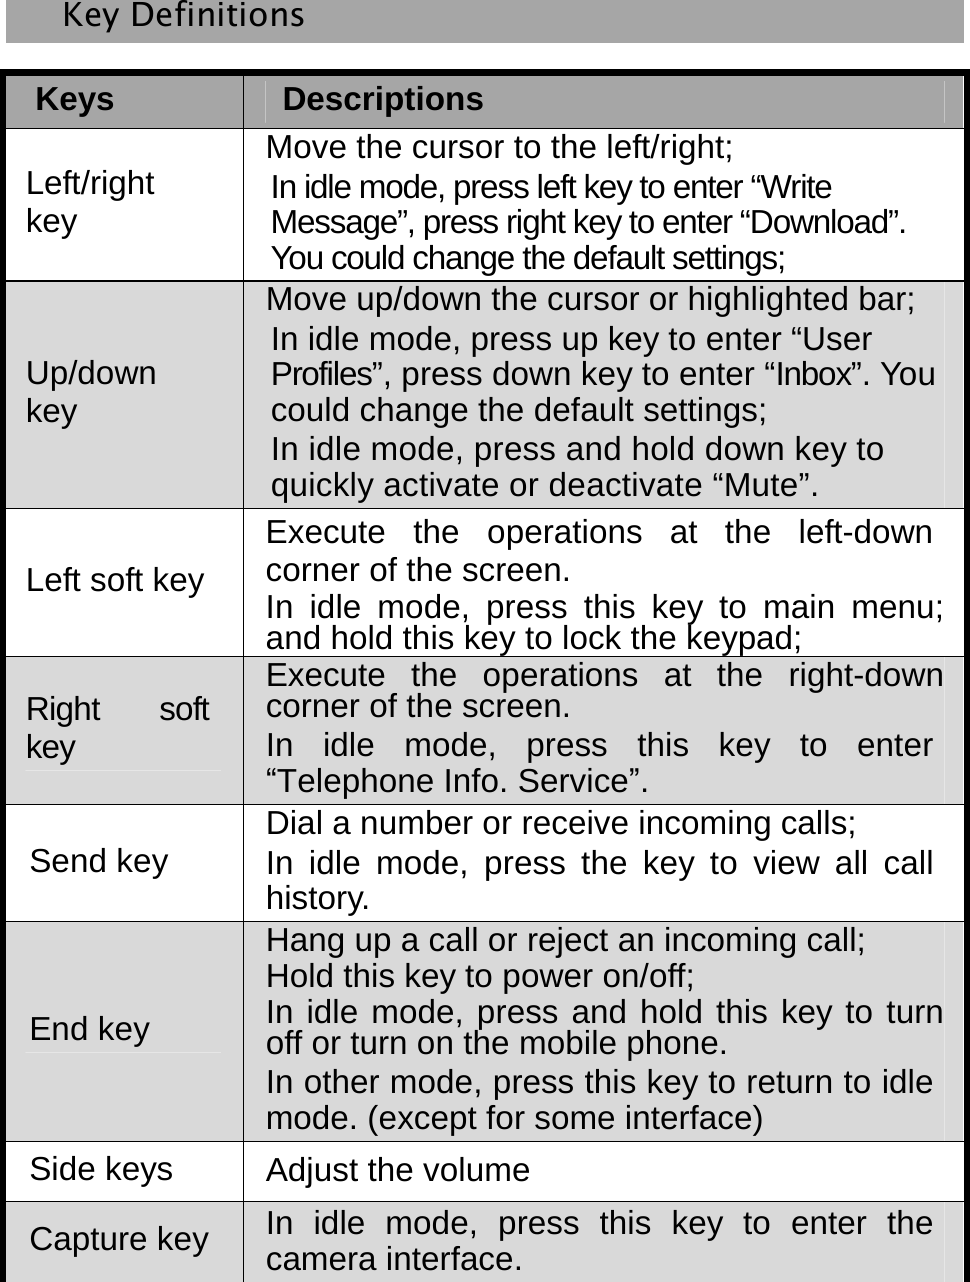    Key Definitions Keys  Descriptions Left/right key Move the cursor to the left/right; In idle mode, press left key to enter “Write Message”, press right key to enter “Download”. You could change the default settings;   Up/down key Move up/down the cursor or highlighted bar; In idle mode, press up key to enter “User Profiles”, press down key to enter “Inbox”. You could change the default settings; In idle mode, press and hold down key to quickly activate or deactivate “Mute”. Left soft key Execute the operations at the left-down corner of the screen. In idle mode, press this key to main menu; and hold this key to lock the keypad; Right soft key Execute the operations at the right-down corner of the screen. In idle mode, press this key to enter “Telephone Info. Service”. Send key  Dial a number or receive incoming calls;   In idle mode, press the key to view all call history. End key Hang up a call or reject an incoming call;   Hold this key to power on/off; In idle mode, press and hold this key to turn off or turn on the mobile phone. In other mode, press this key to return to idle mode. (except for some interface) Side keys  Adjust the volume   Capture key In idle mode, press this key to enter the camera interface. 